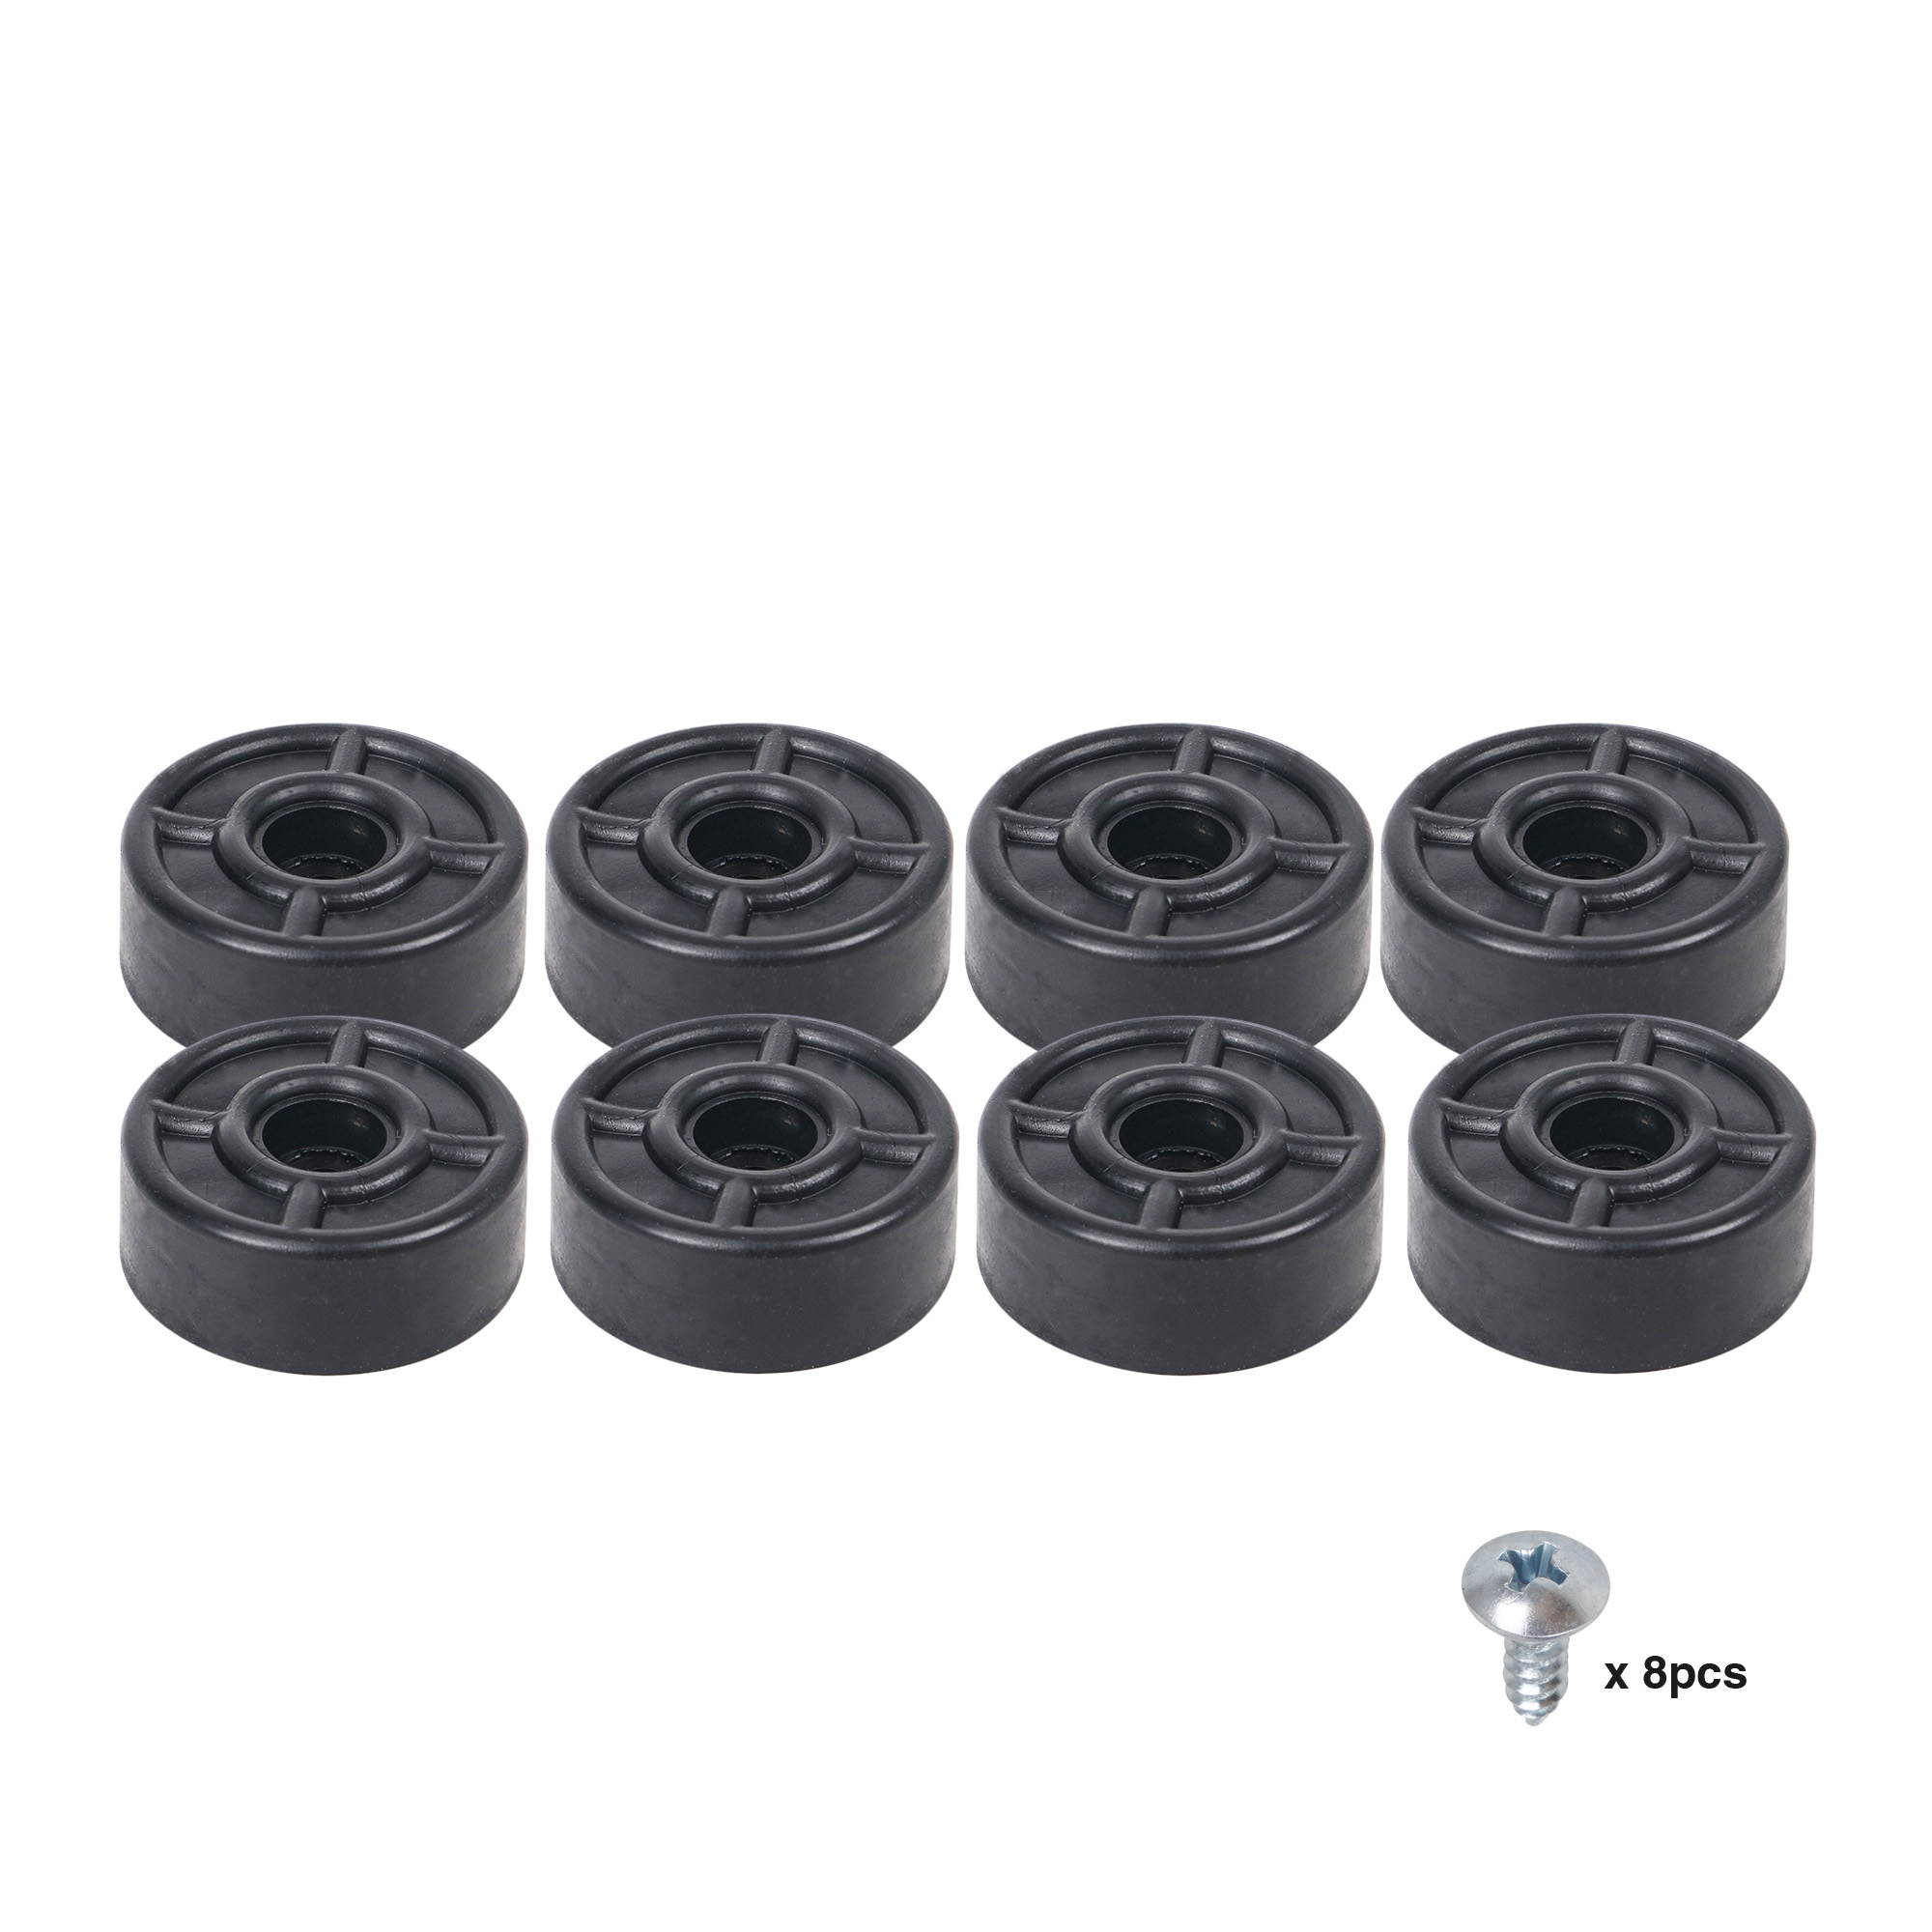 Sound Town 8-Pack Replacement Rubber Feet/Bumpers with Matching Screws, Heavy-Duty, Non Slip, for Flight Case, Speaker Cabinet, Amplifier and Subwoofer (ST-RHW-05) - image 1 of 3